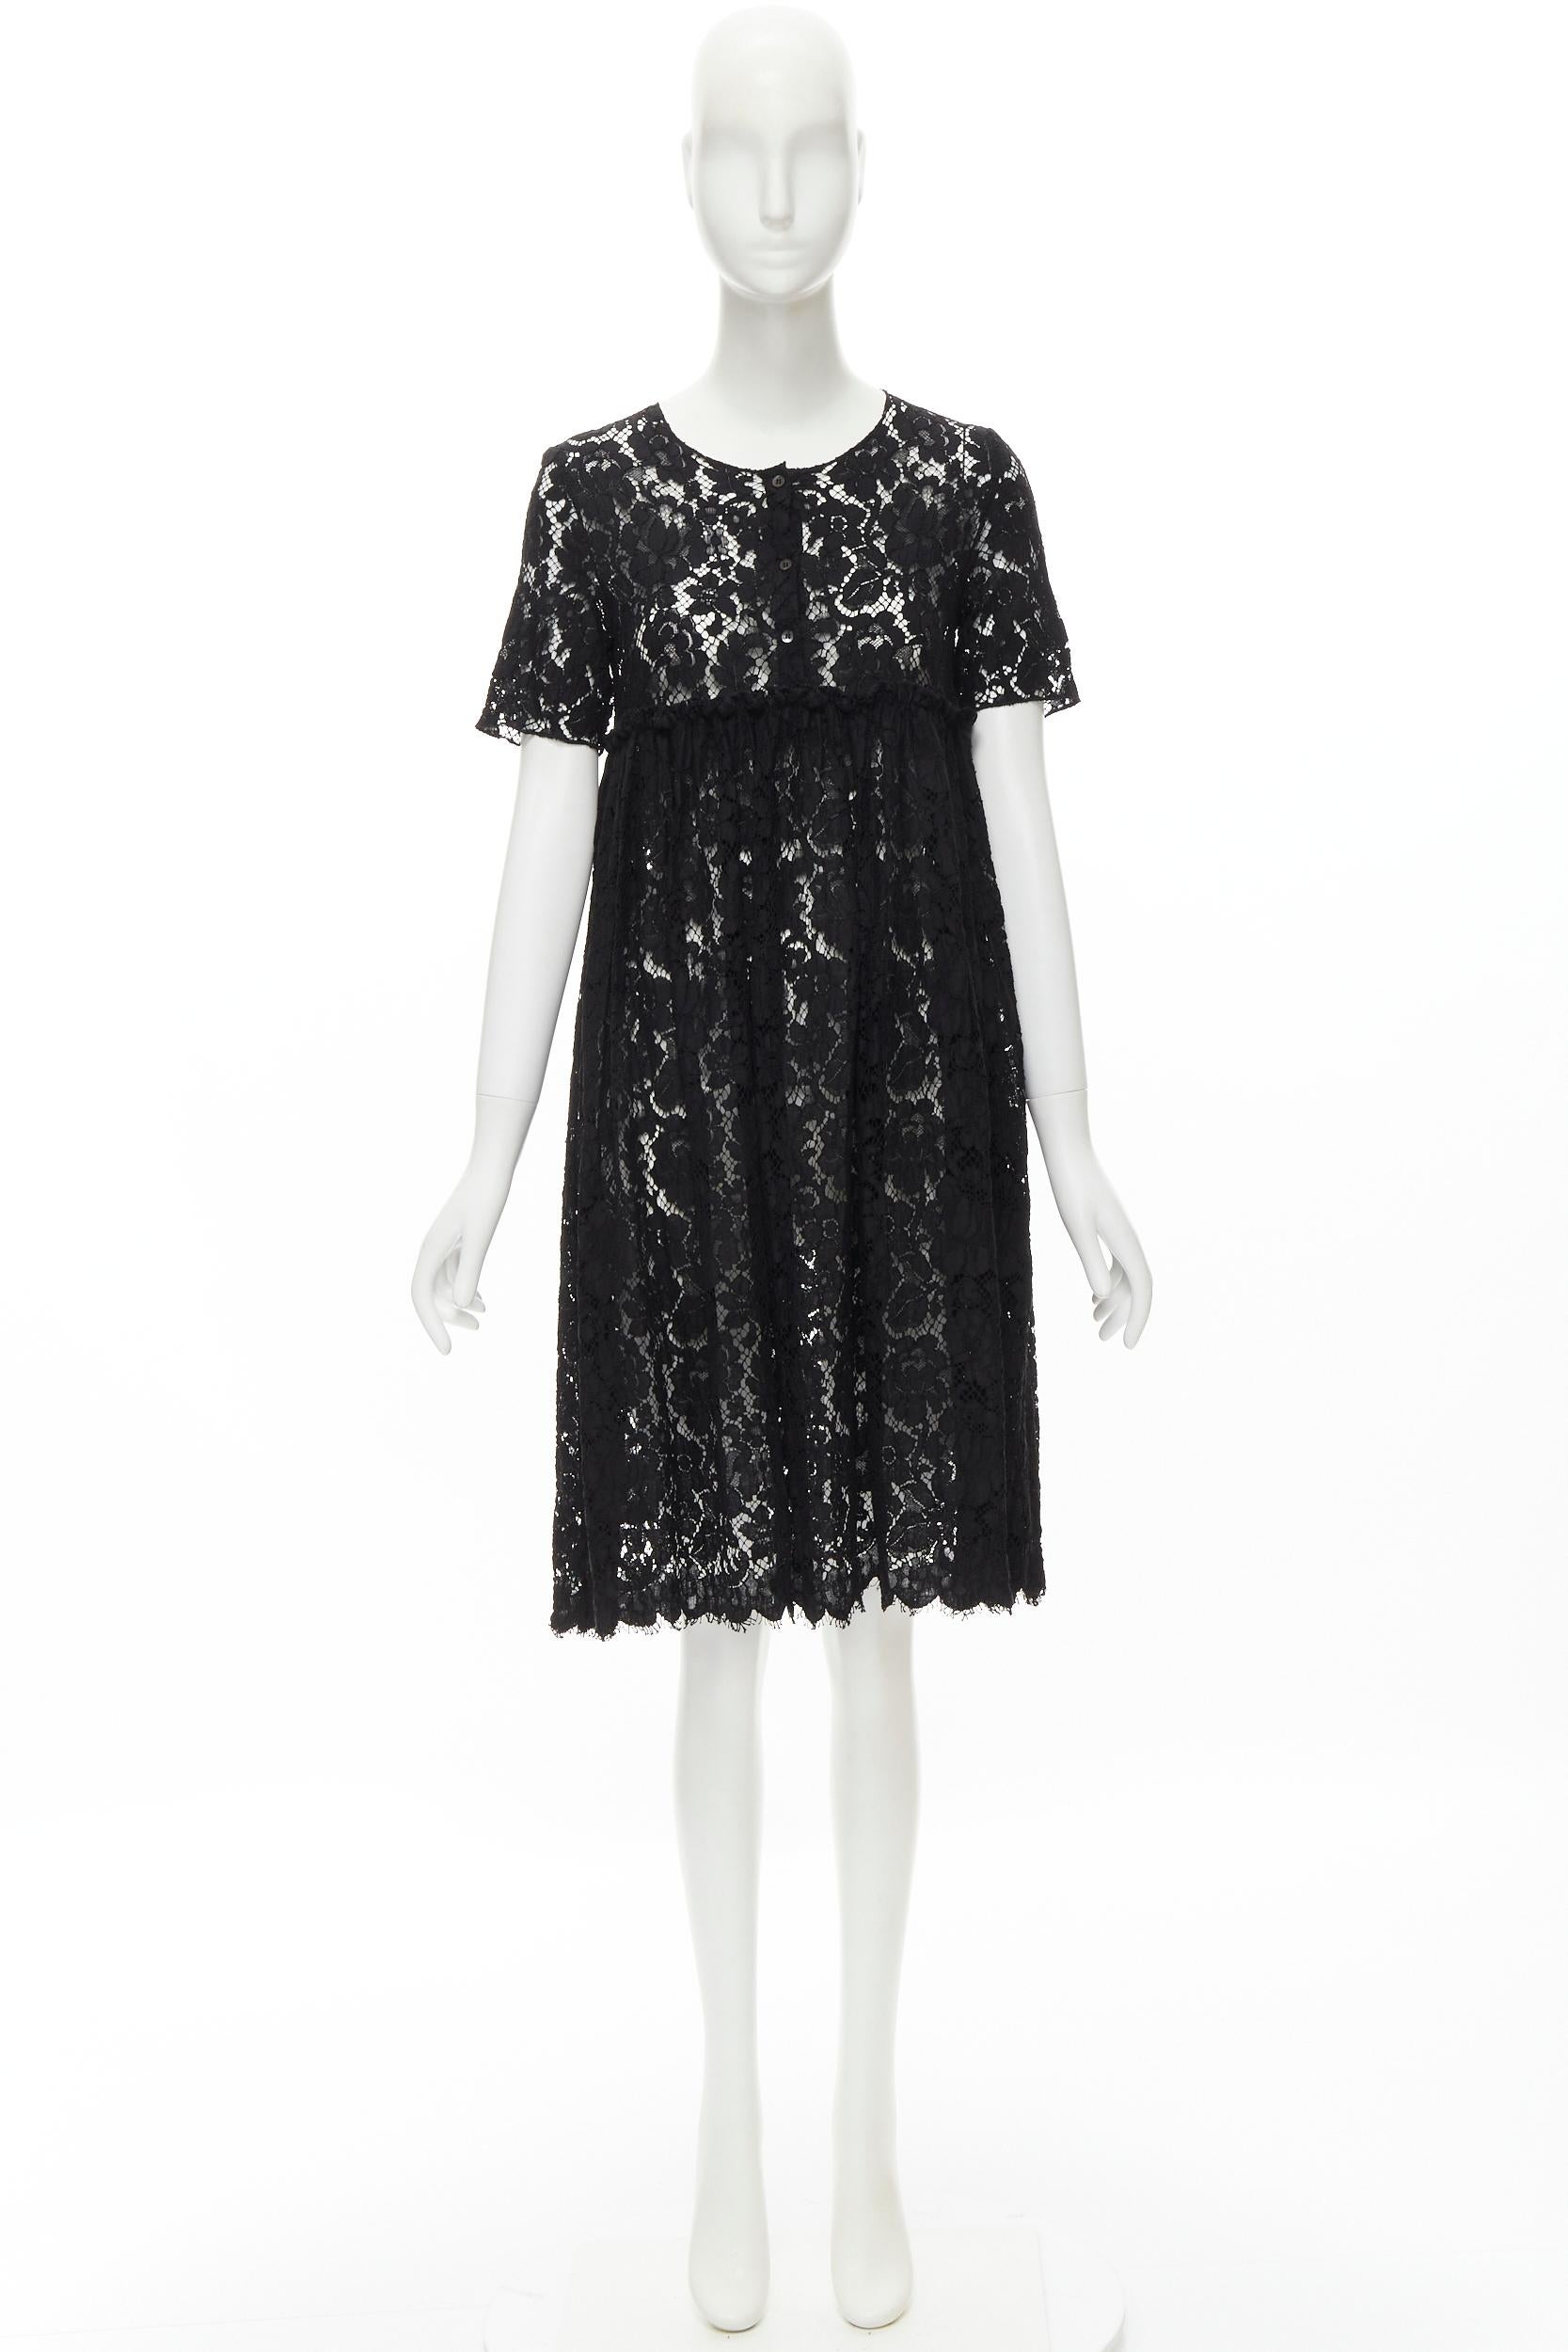 MIU MIU black floral lace high waisted baby doll cocktail dress IT40 S 3